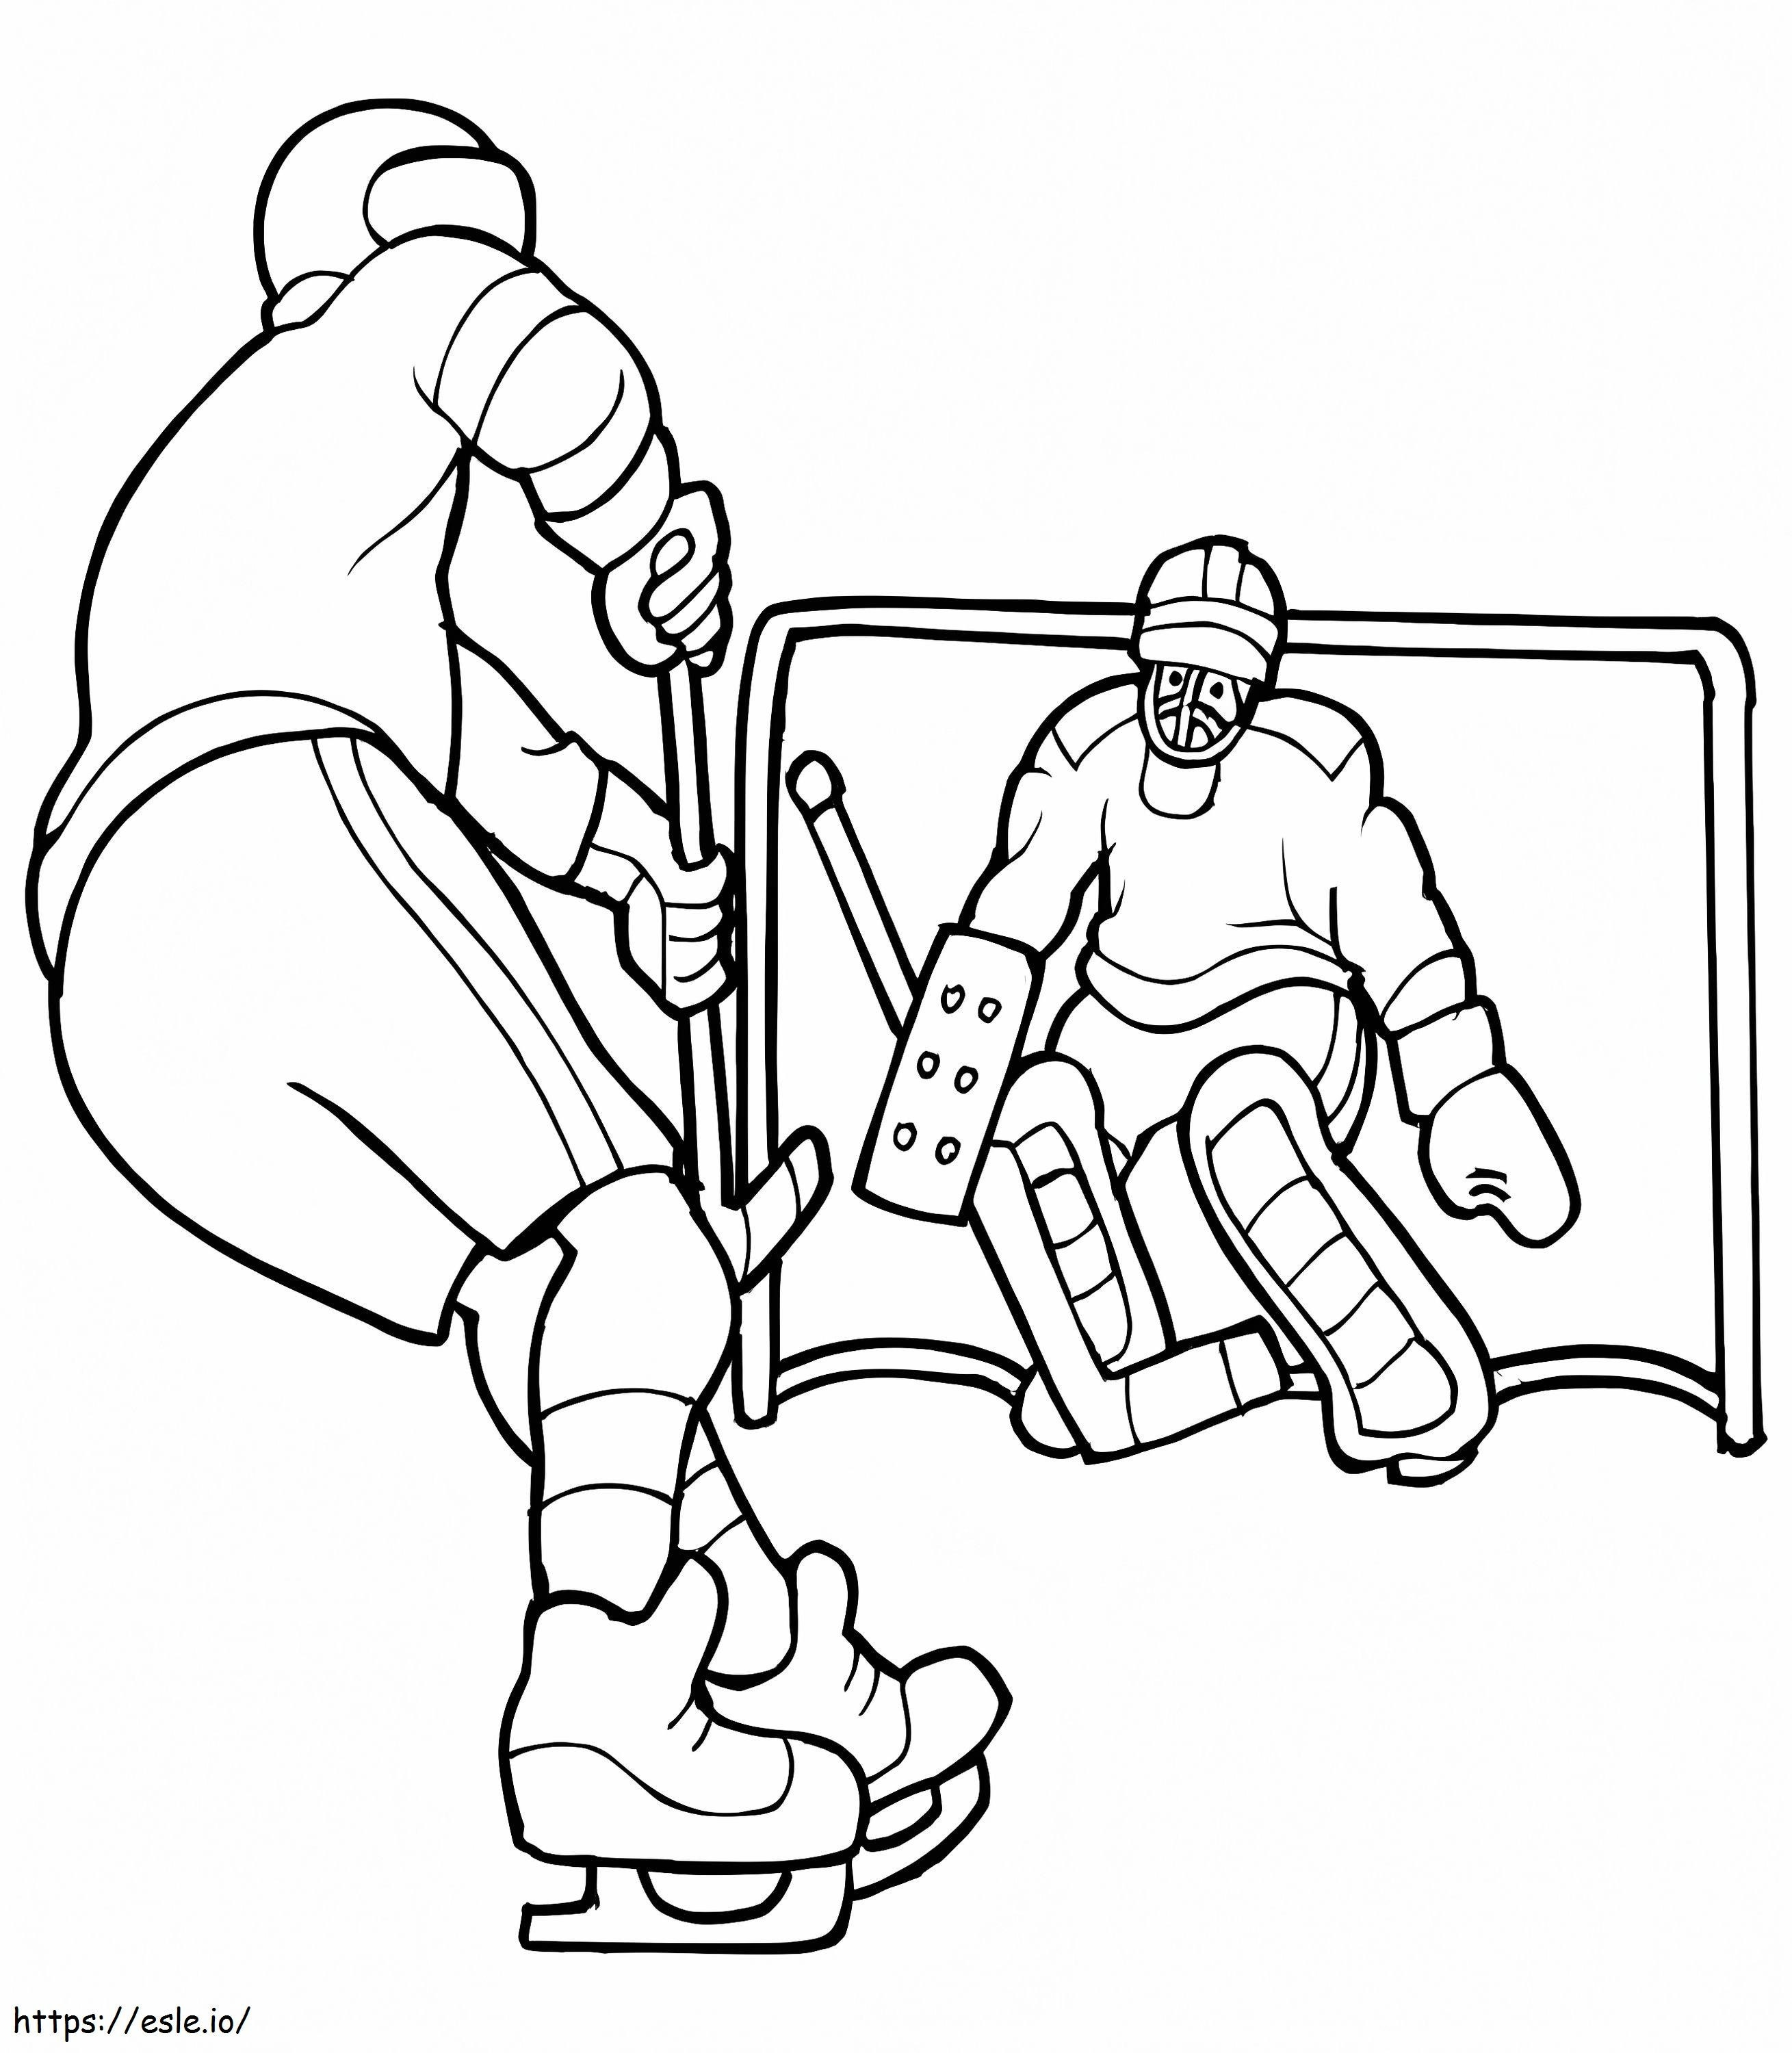 Ice Hockey Player coloring page